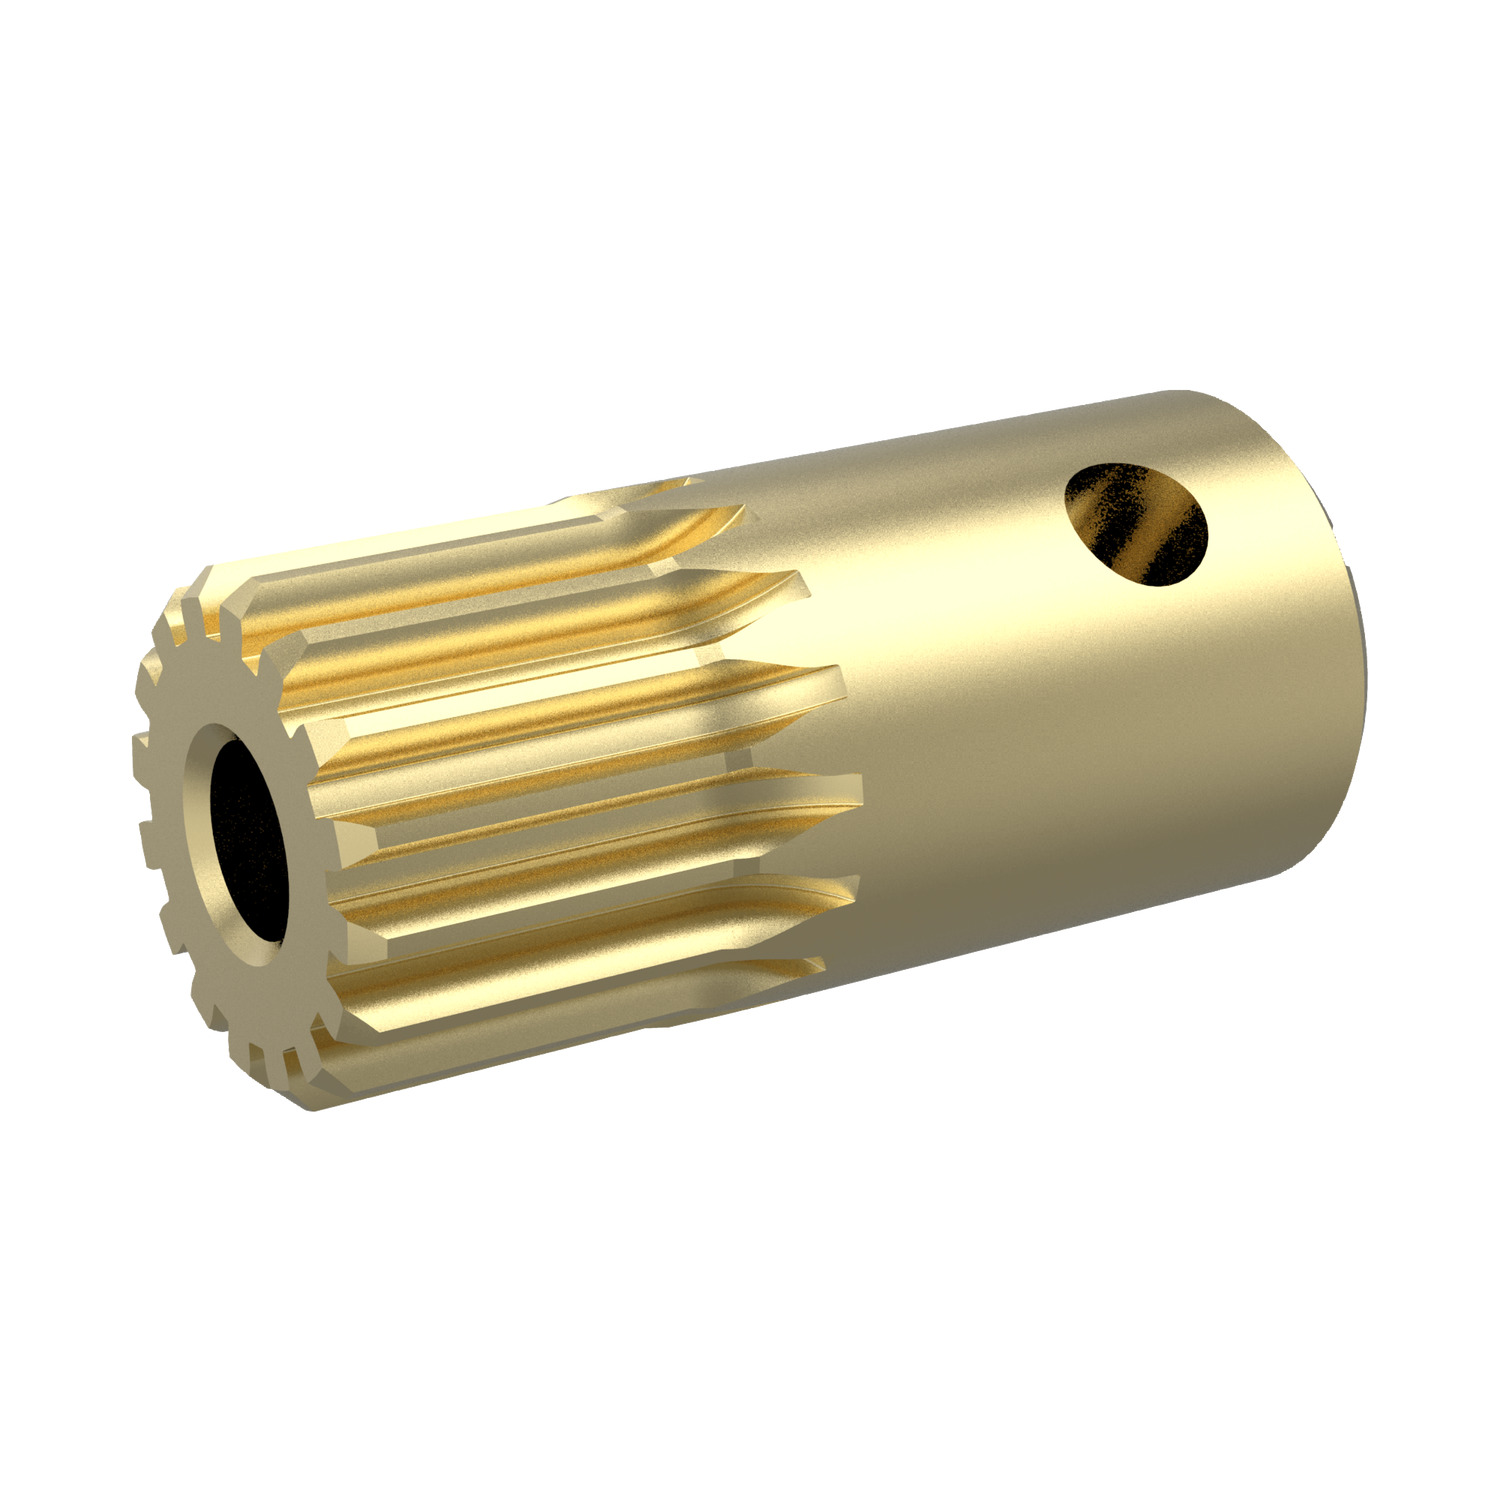 Spur Gears Module 0.3 Module 0.3 Spur Gear available in brass (C3604B) with 14-120 teeth. Accuracy to JIS B 1702-1 (ISO) class 9.